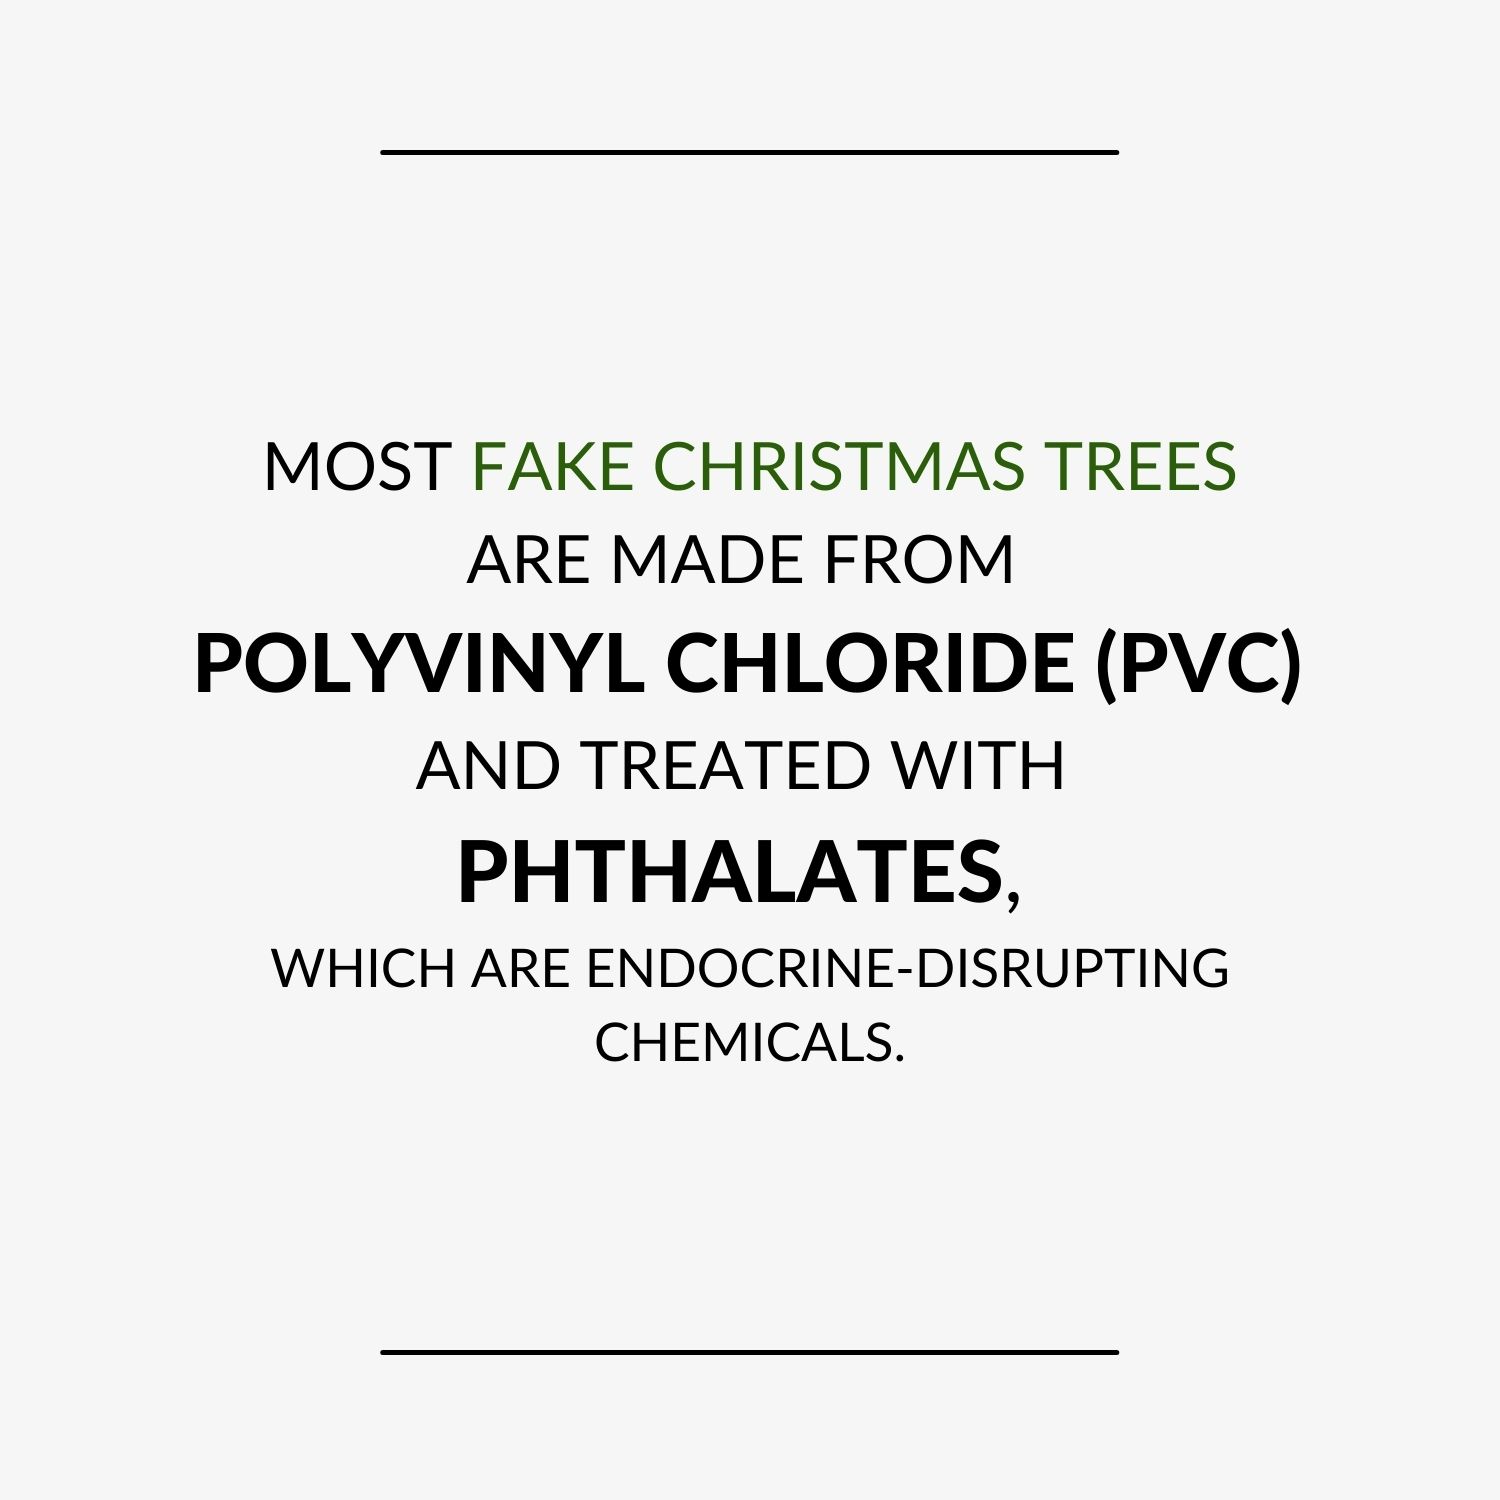 Fact - Most fake Christmas trees are made from PVC, polyvinyl chloride, and treated with phthalates, which are endocrine-disrupting chemicals.